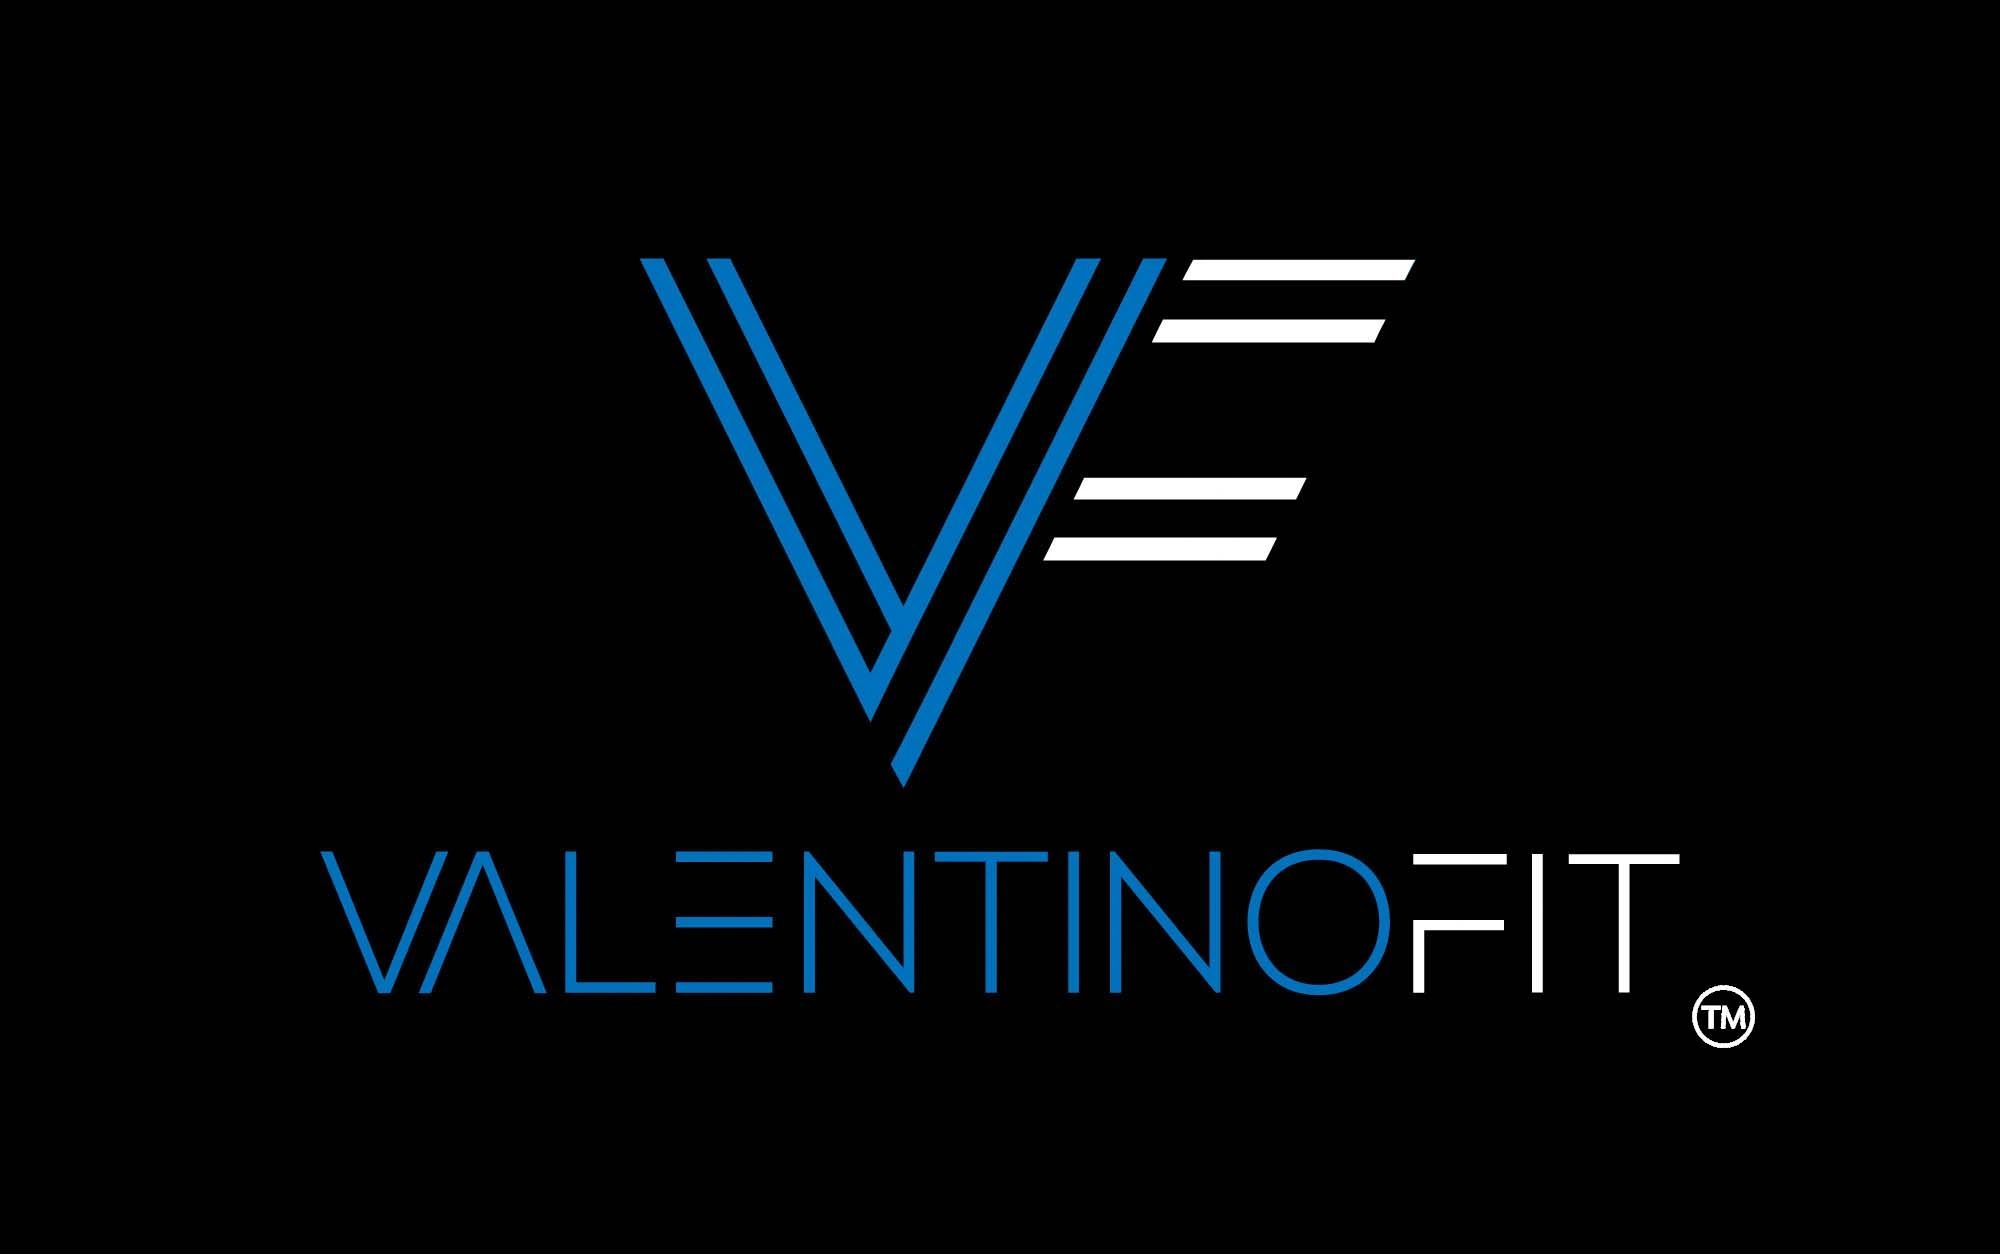 Valentino Fit - Personal Trainer, Wellness, Workout Plans